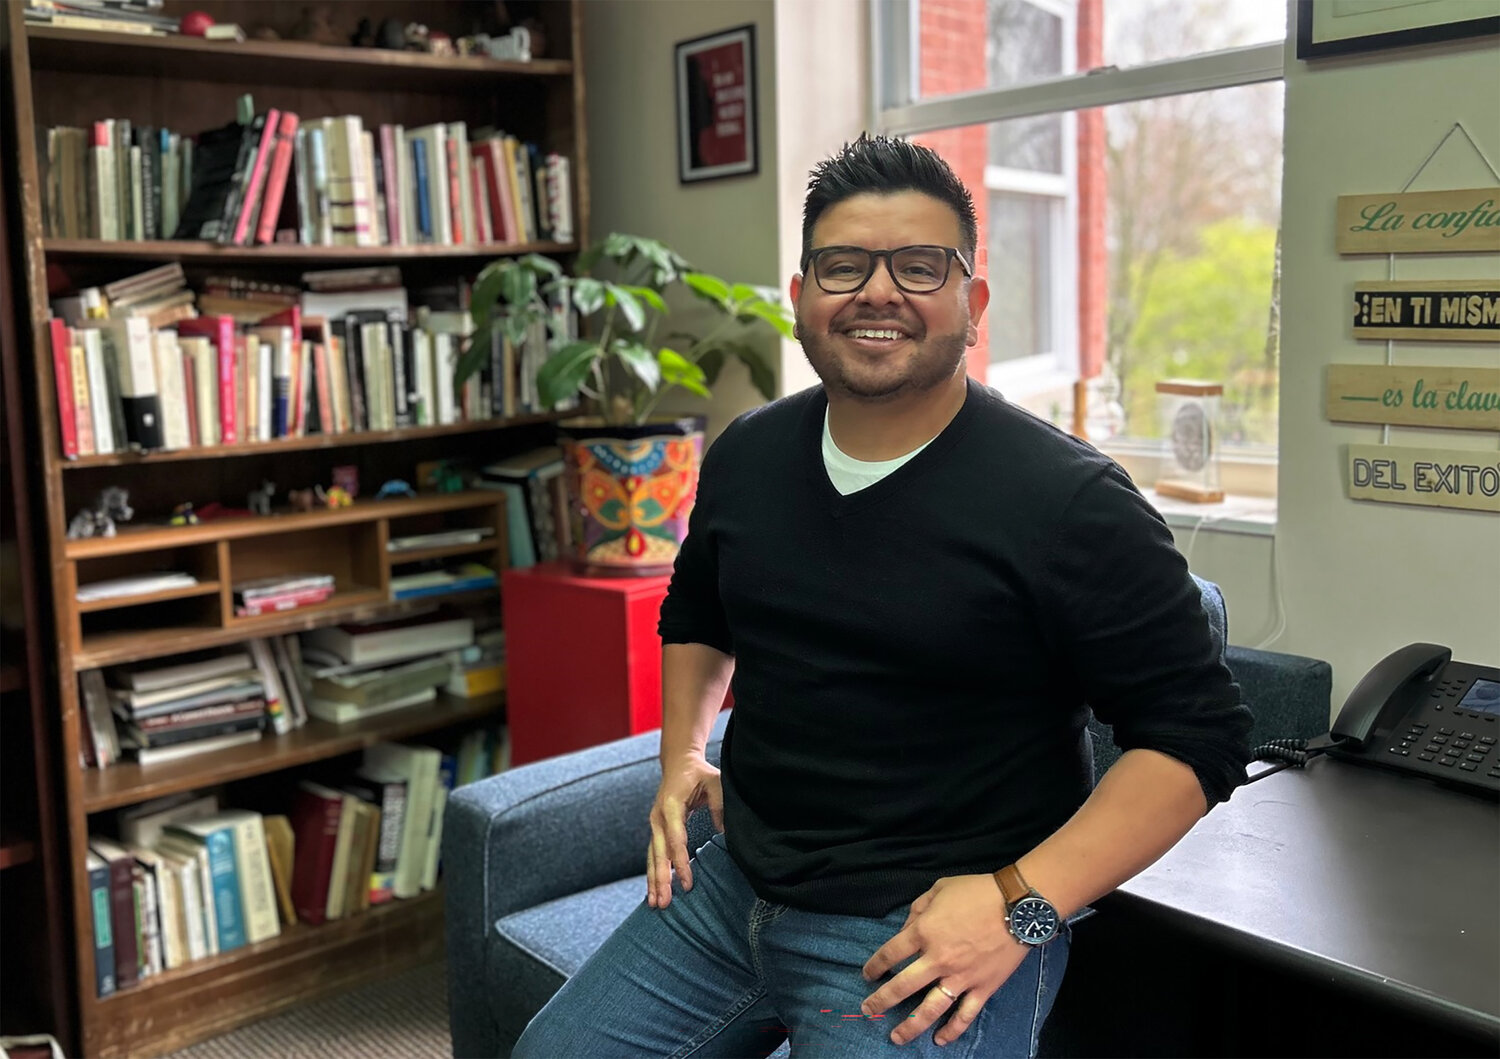 Wabash College alumnus and Visiting Associate Professor of Spanish Julio Enríquez-Ornelas ’08 has been appointed the inaugural Director of Latino Partnerships at the college and will begin his tenure June 1.